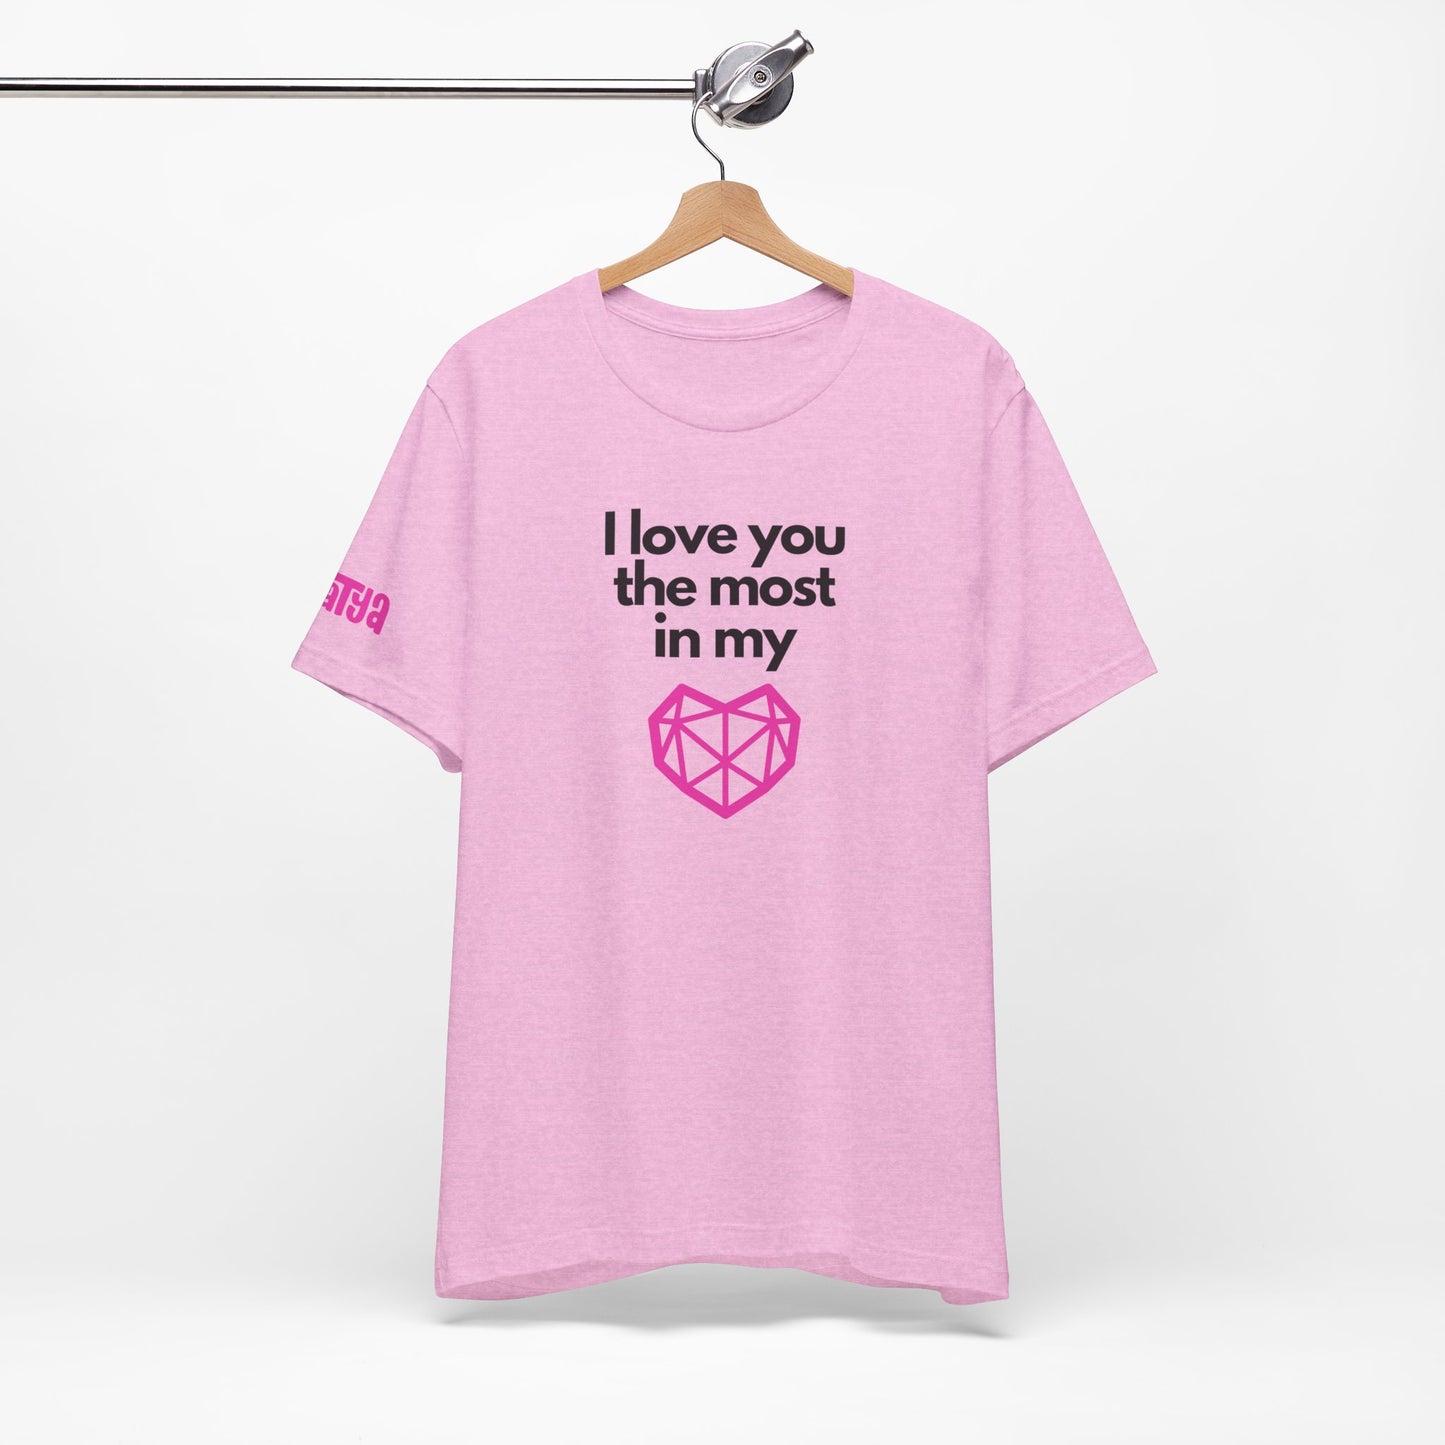 I love you the most on my heart word and graphic t-shirt